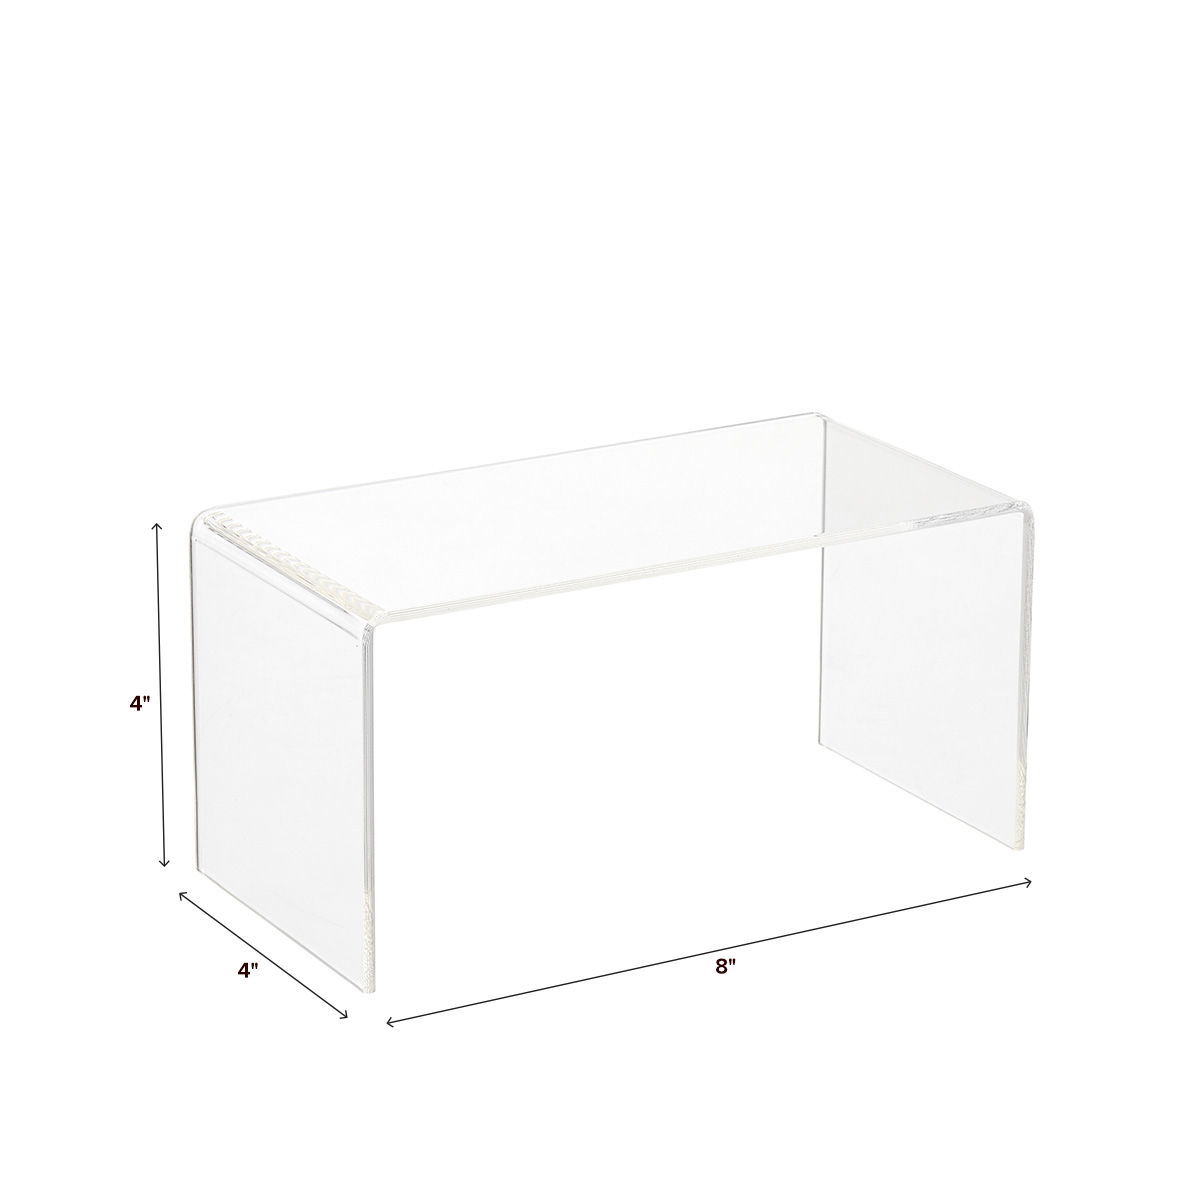 16 Clear Acrylic Riser Stand counter display 2-3/4"H x 9.5"W x 11"L 